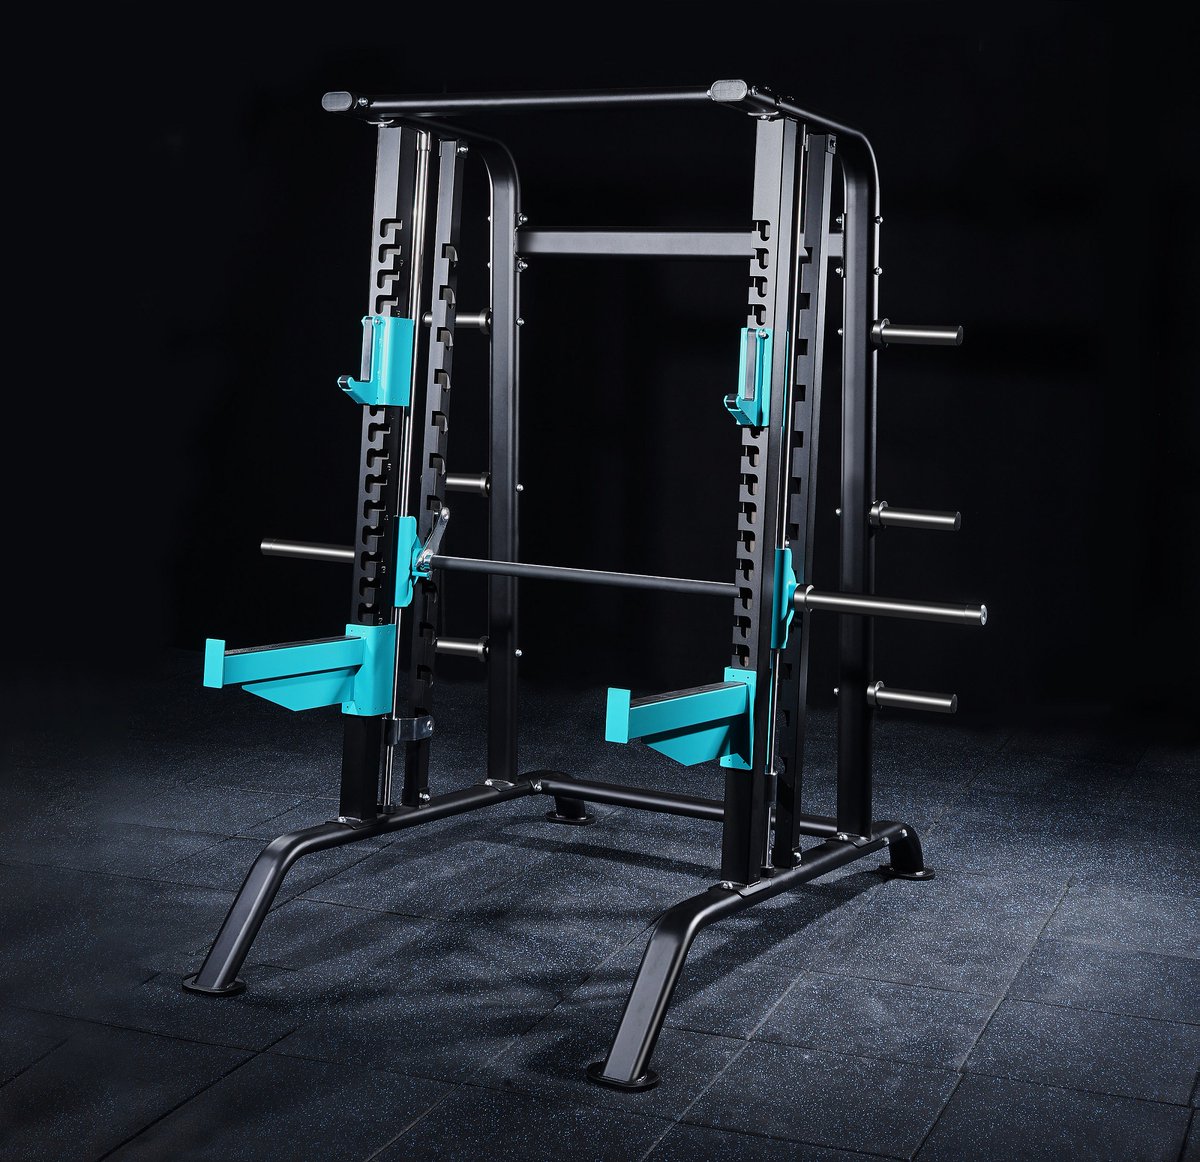 Commercial Smith Machine In Stock, Welcome To Consult. #Fitness #CommercialEquipment #StrengthTraining #lifestyle #powerrack #squatstand #gym